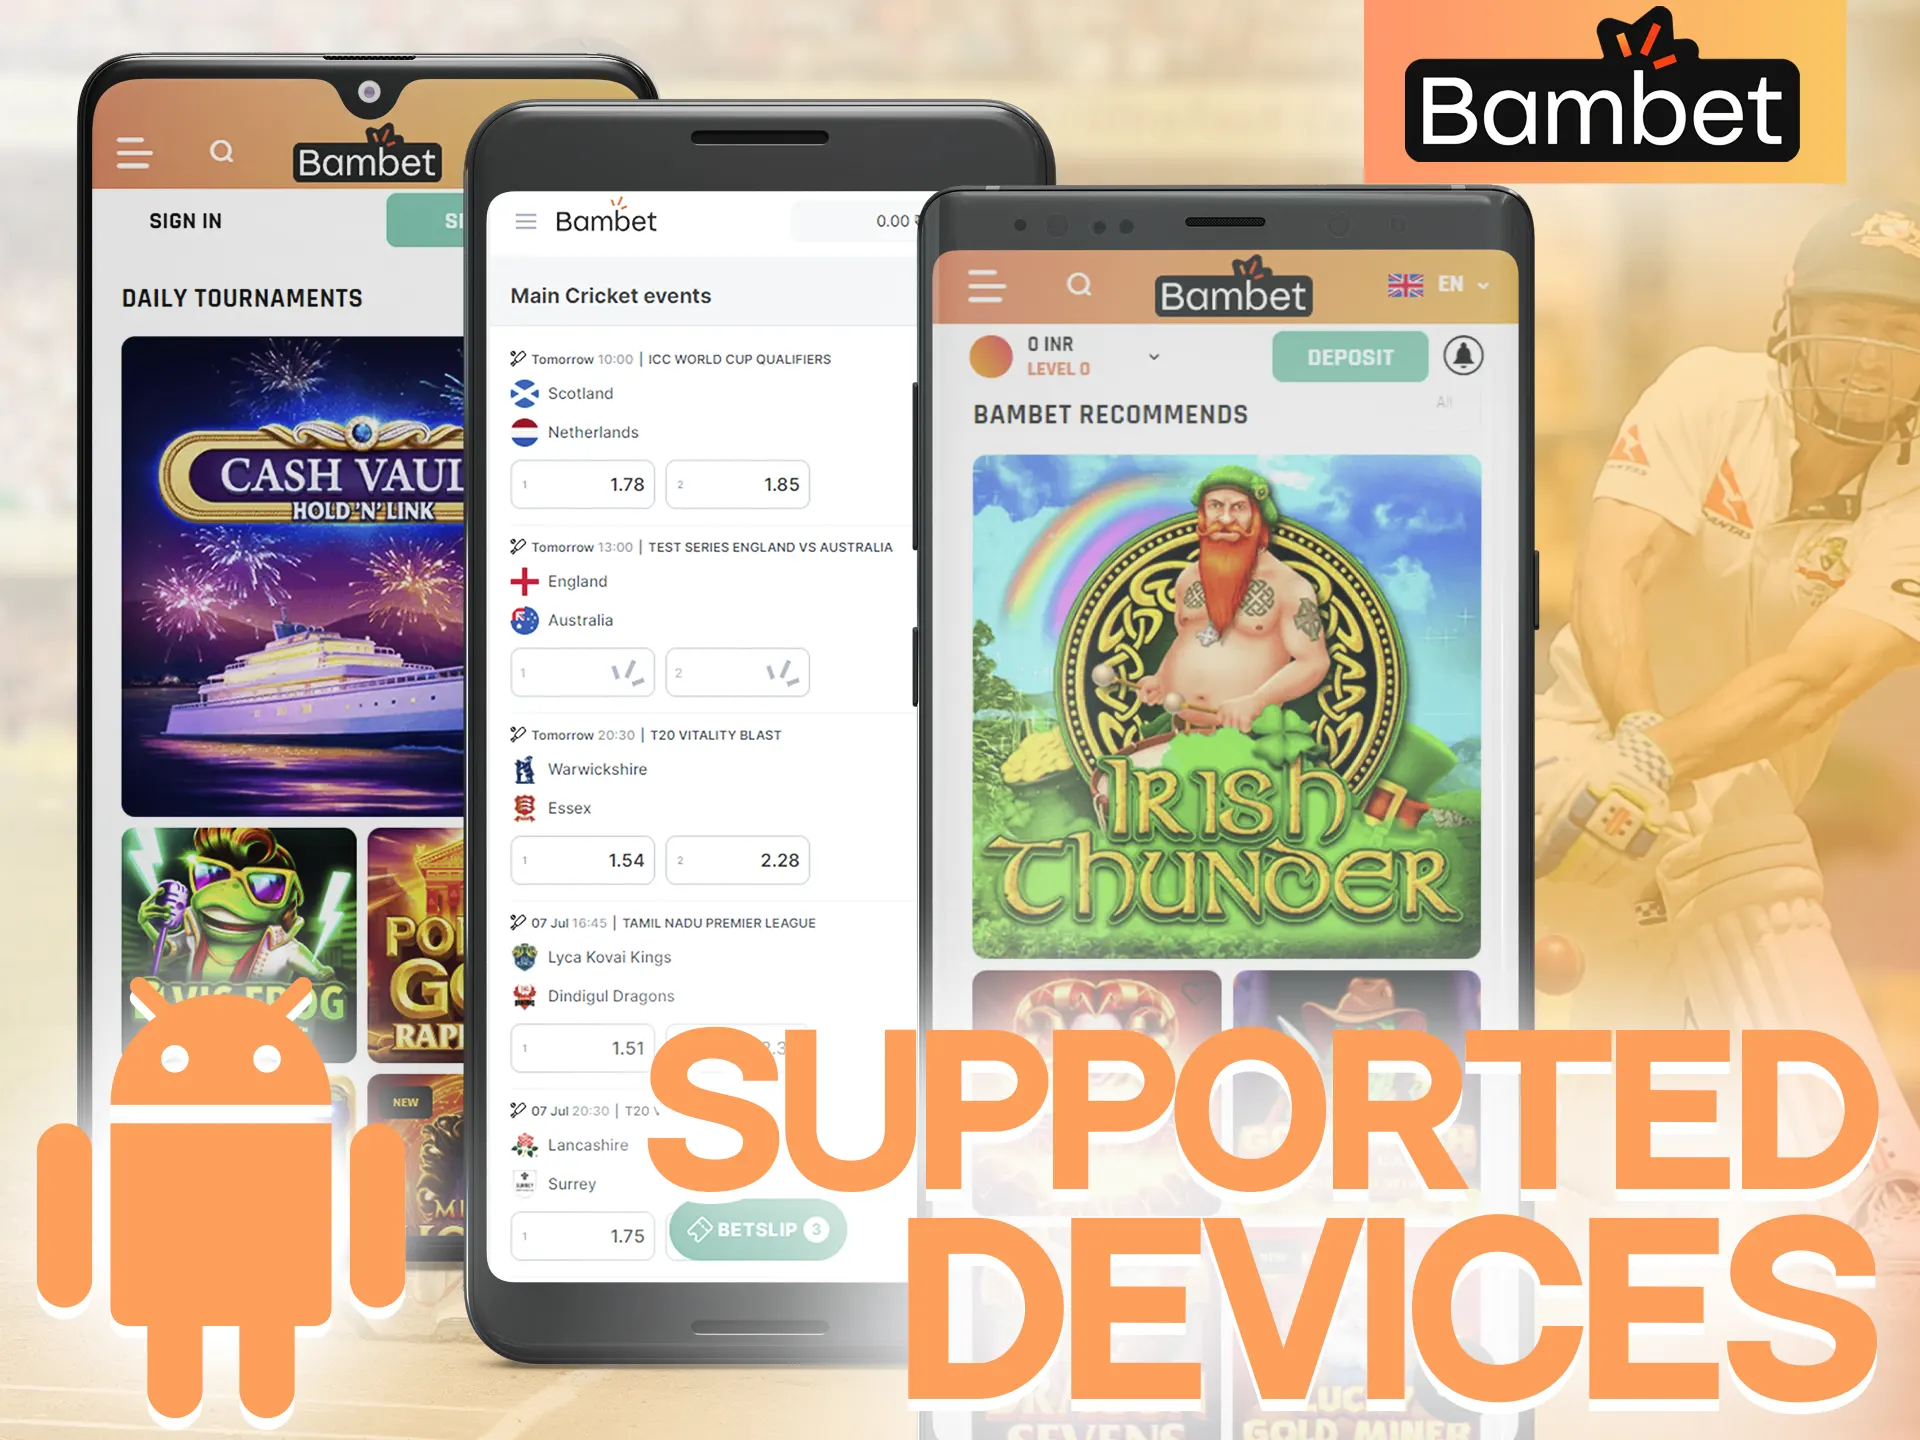 The Bambet app can be installed on a variety of Android devices.